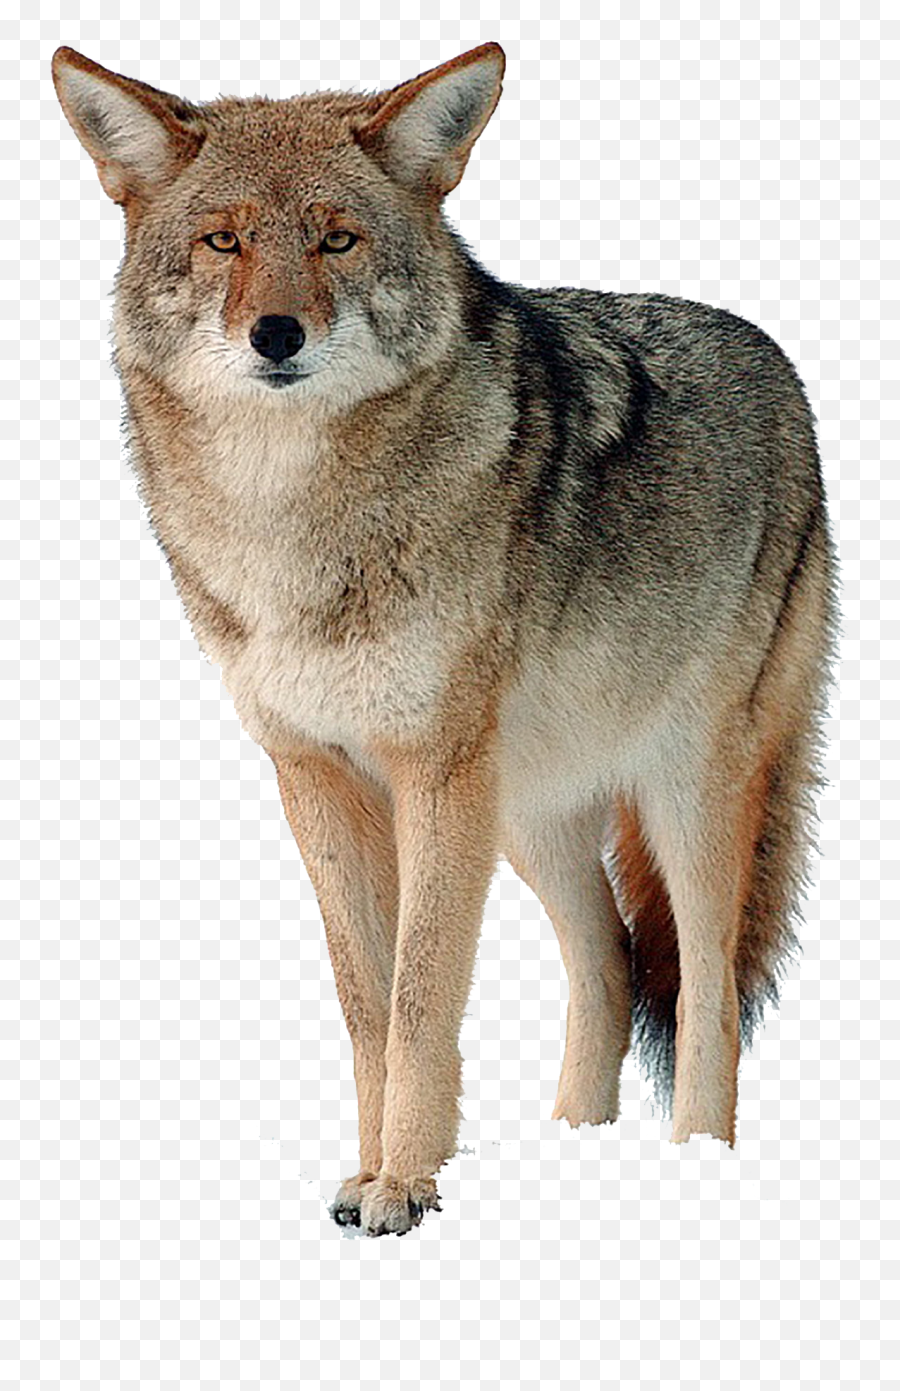 Coyote Png Hd - Coyote Png Transparent,Coyote Png